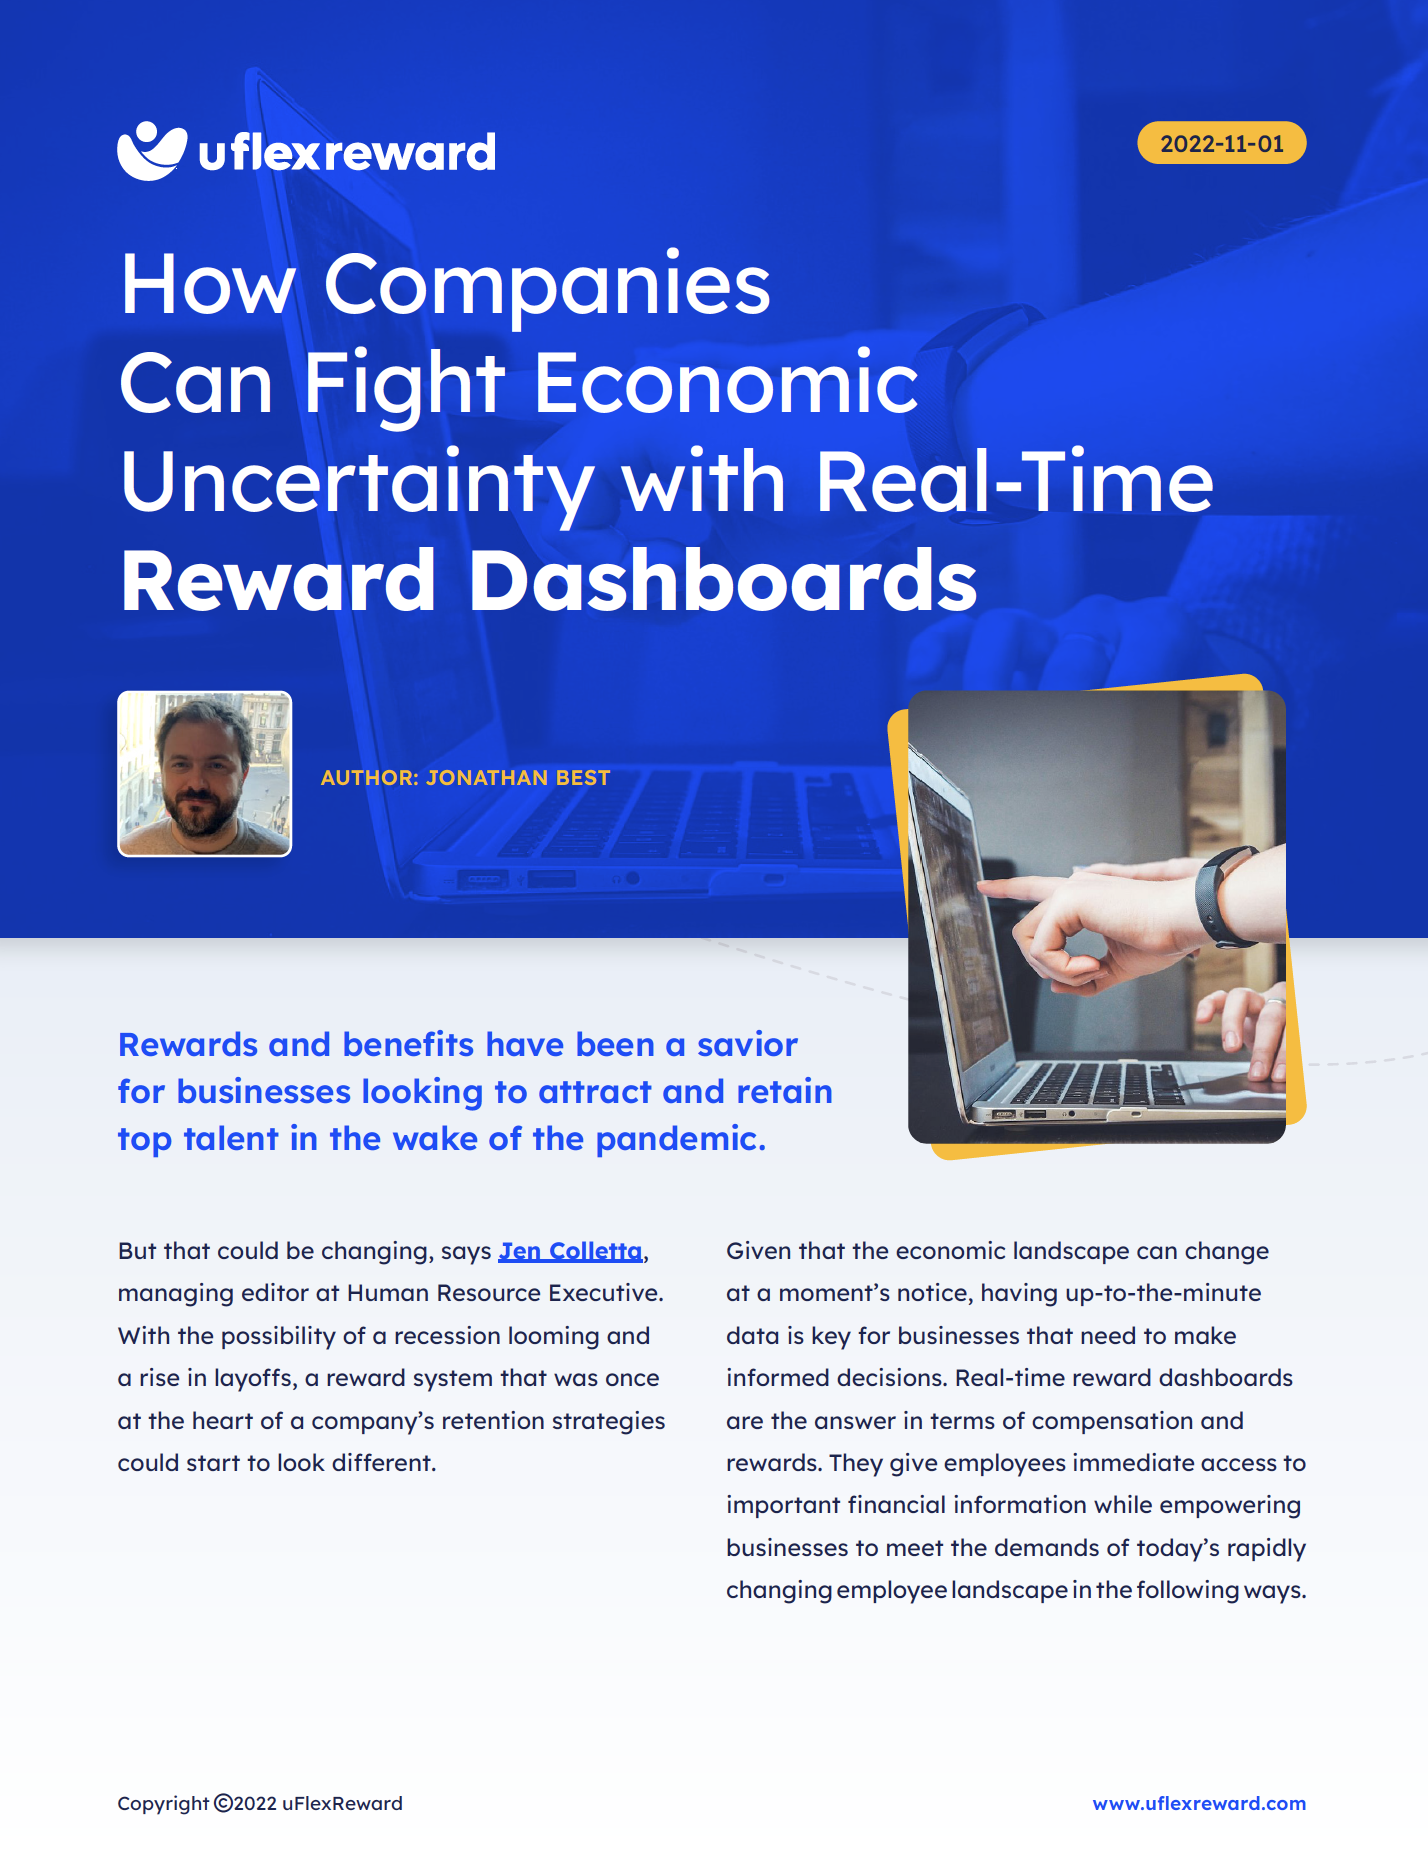 How Companies Can Fight Economic Uncertainty with Real-Time Reward Dashboards